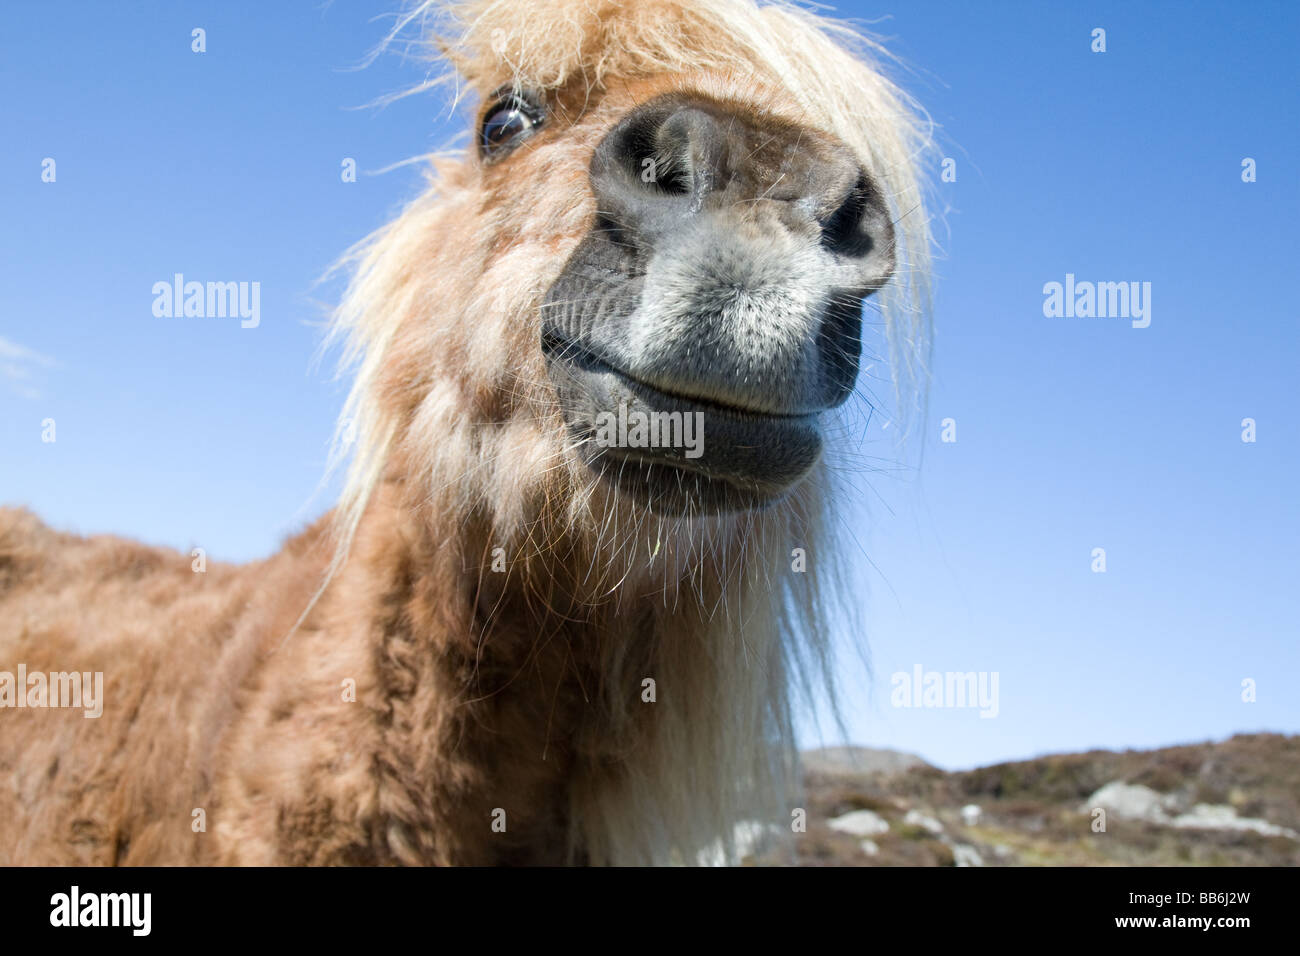 Shetland Pony showing one eye for the camera, South Uist, Scotland Stock Photo